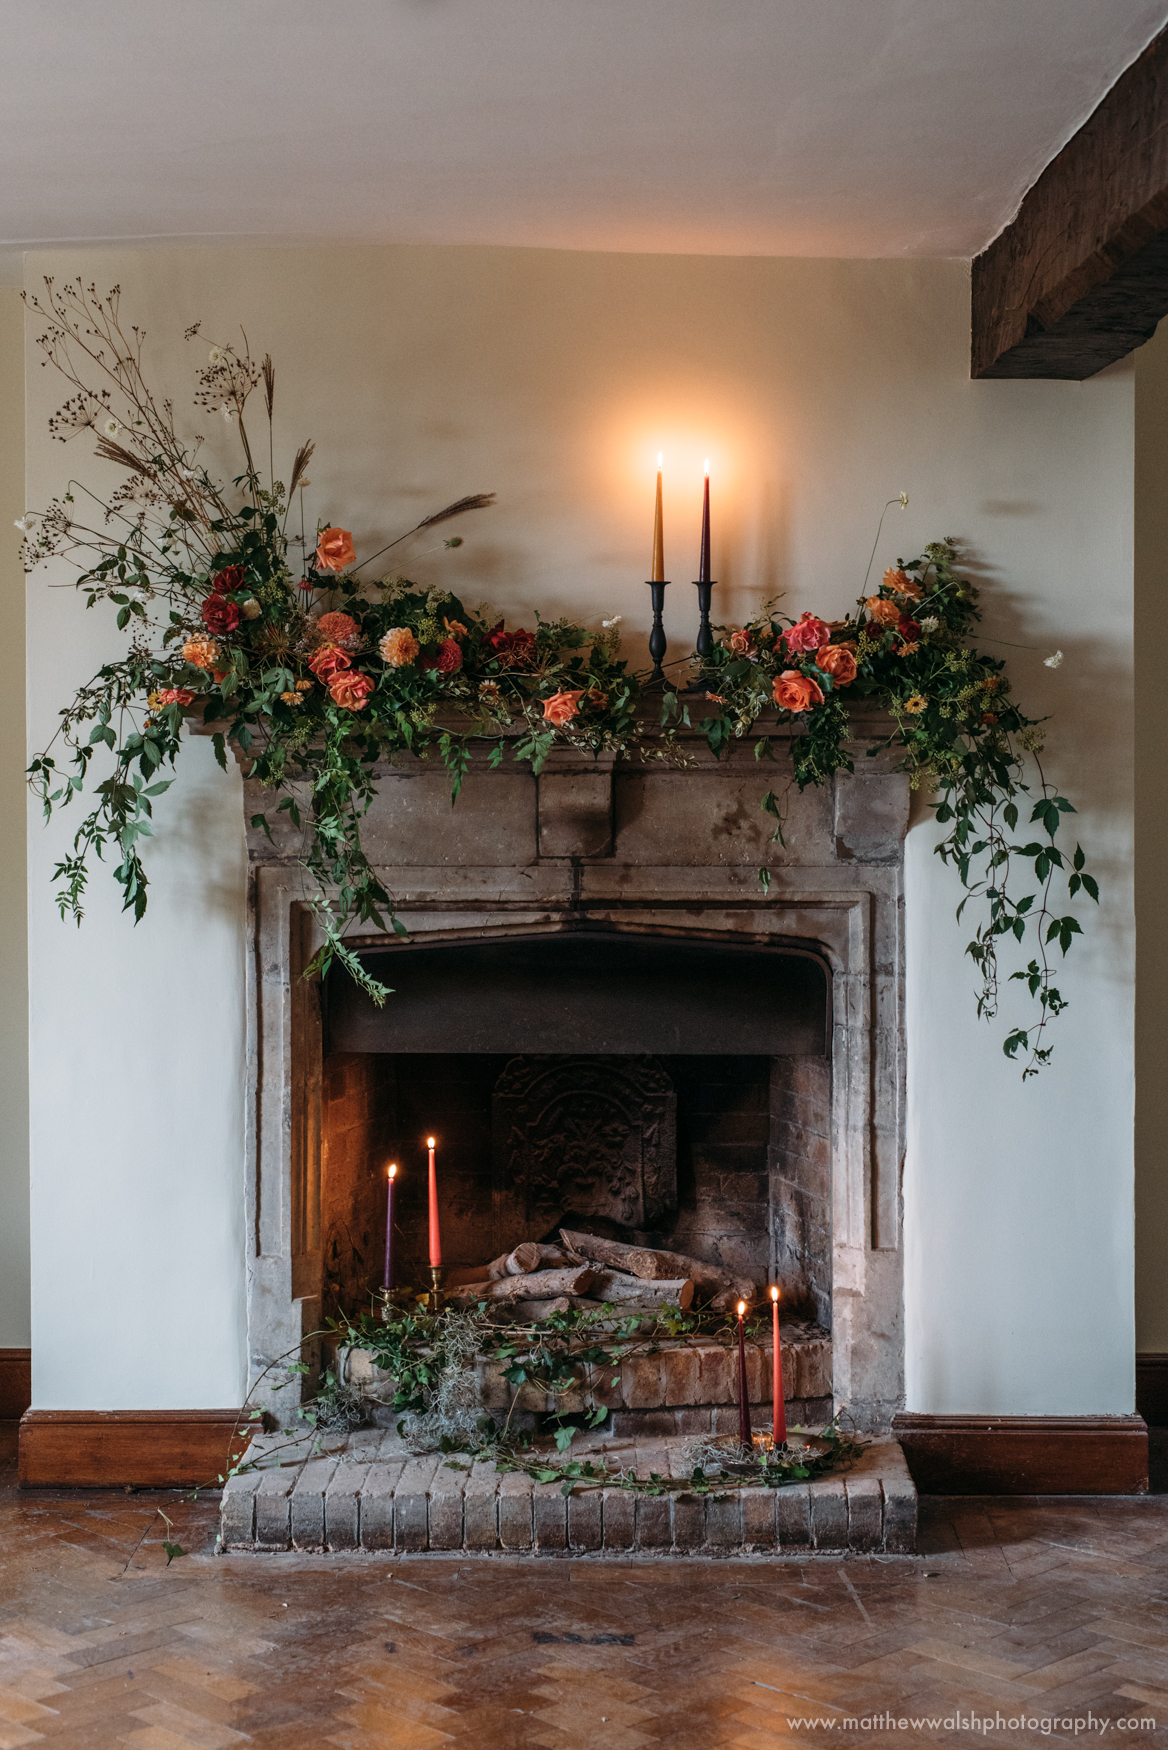 Fireplace giving off a festive vibe